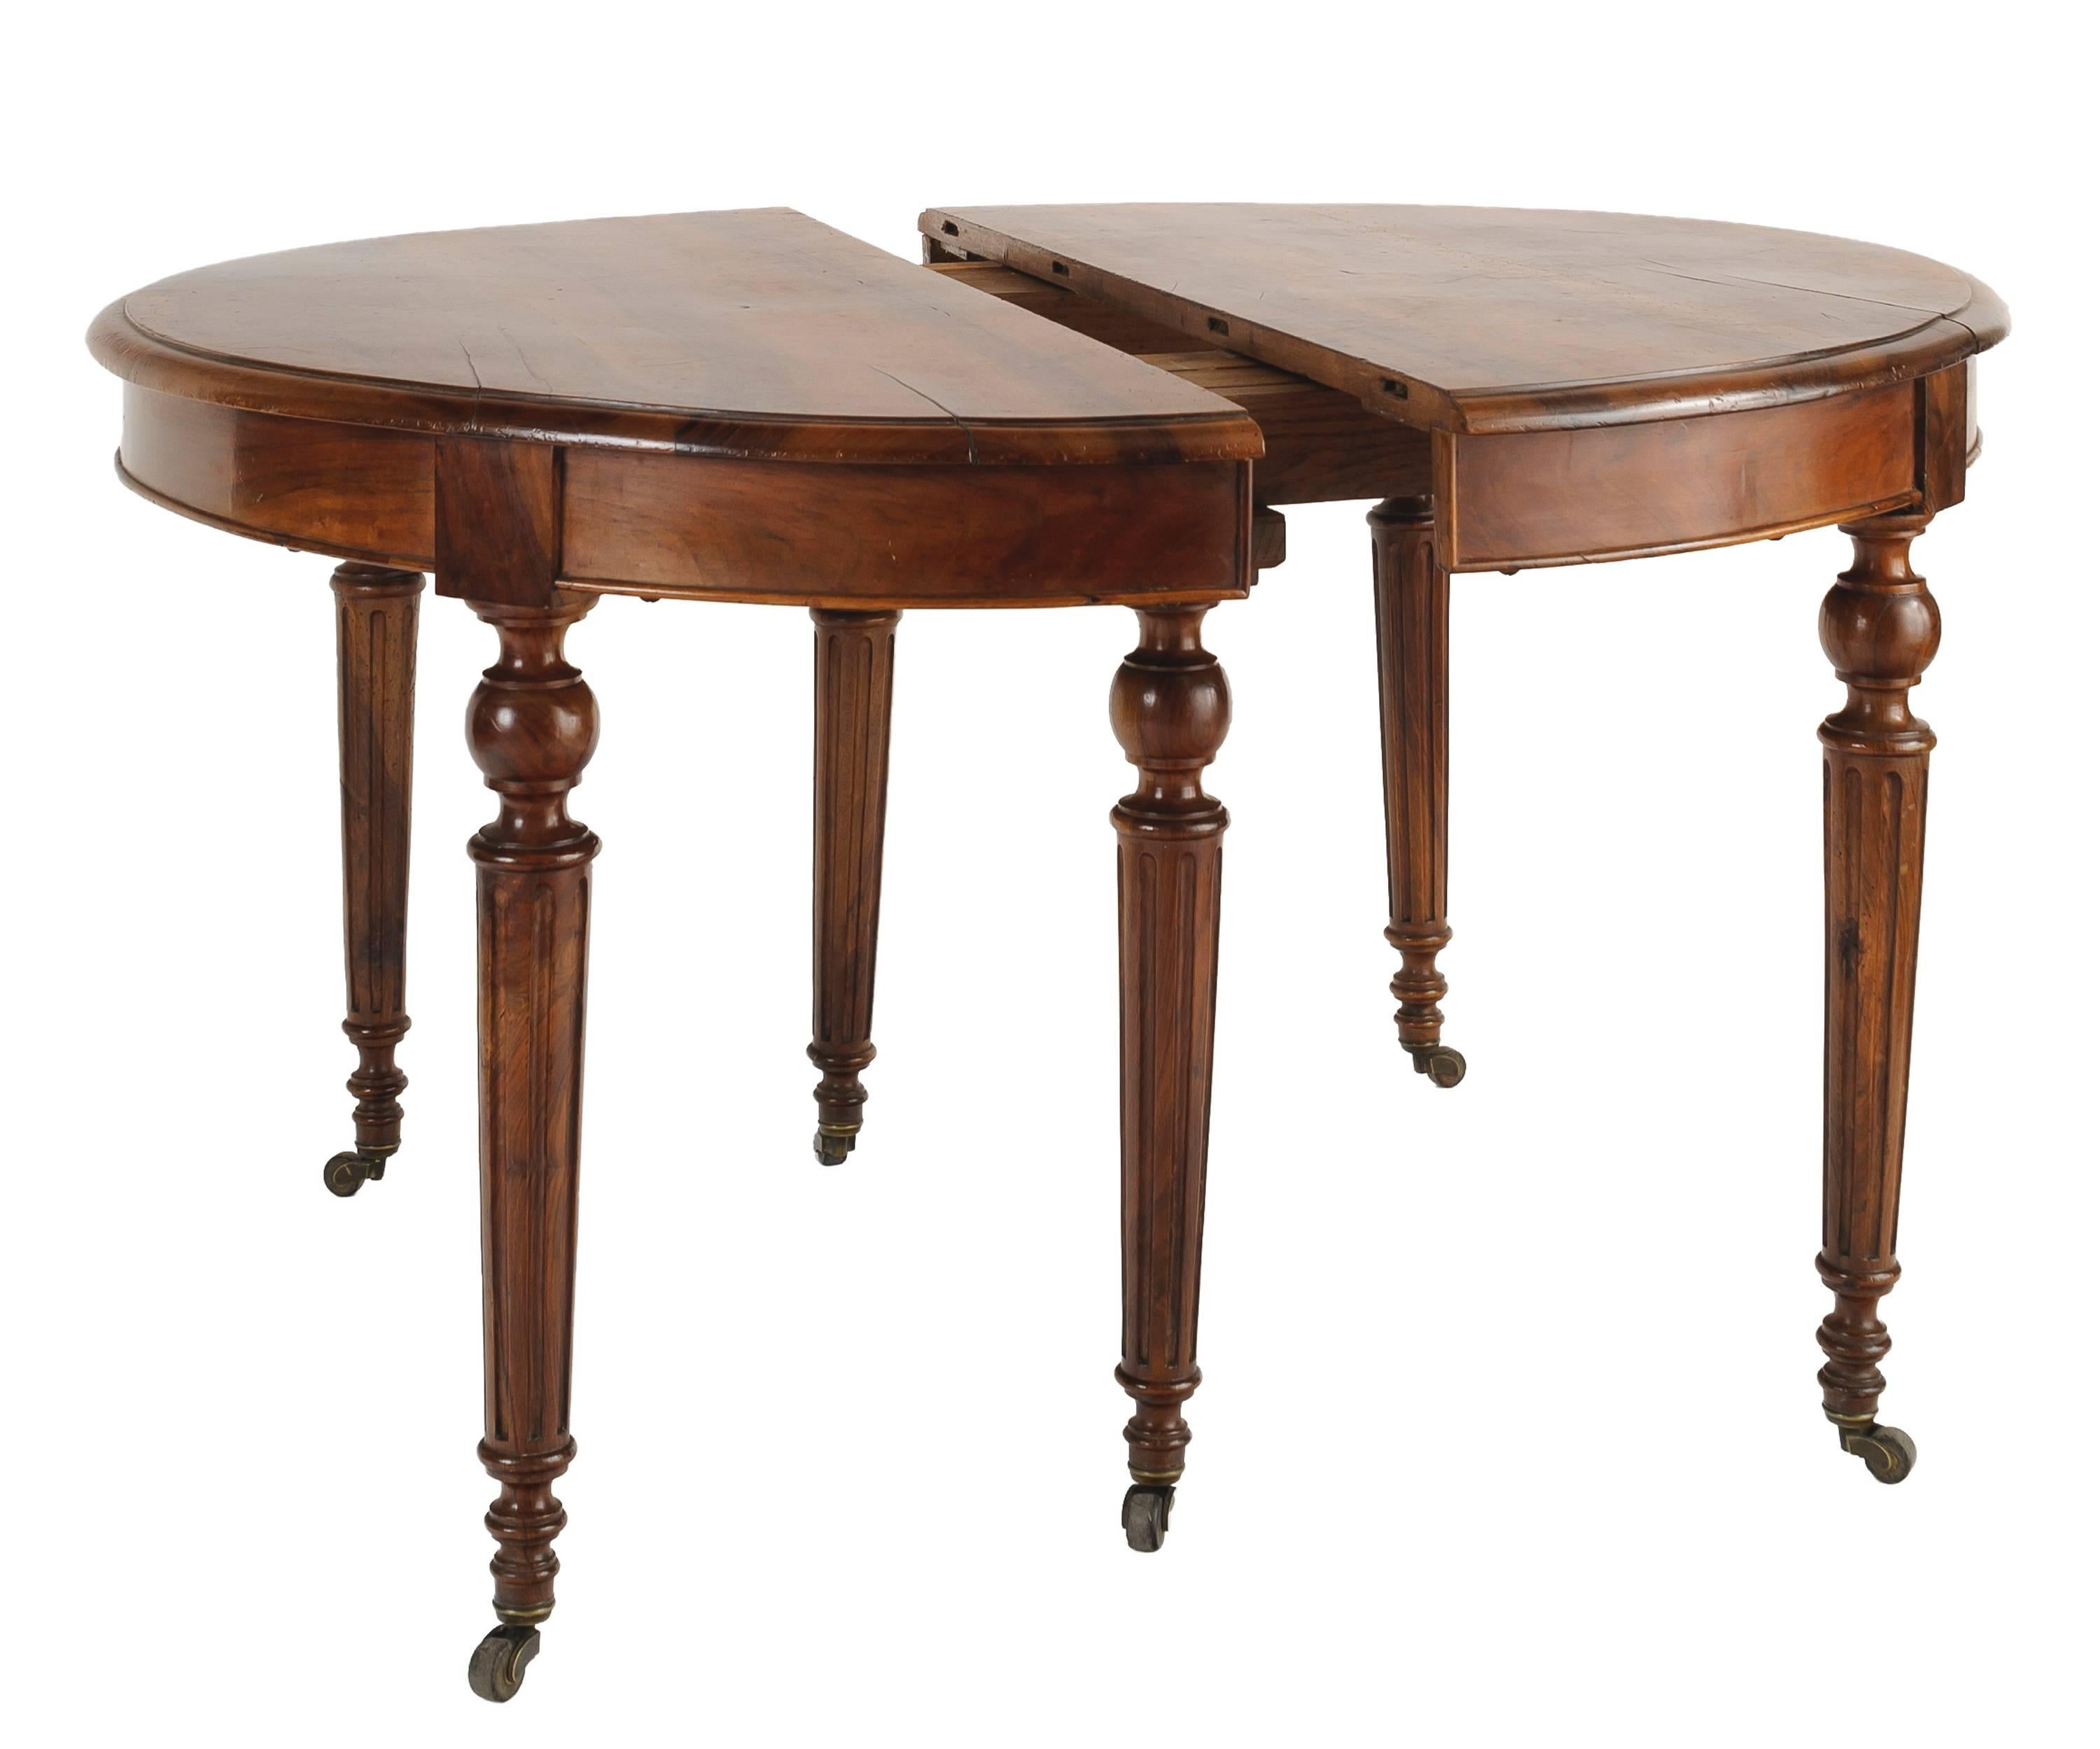 French round walnut table with ogee edge. The walnut wood has a wonderful patina and beautiful markings. The six legs are turned and tapered with ball and flange at top. The legs have channelled detail and sit on original bronze casters. There are